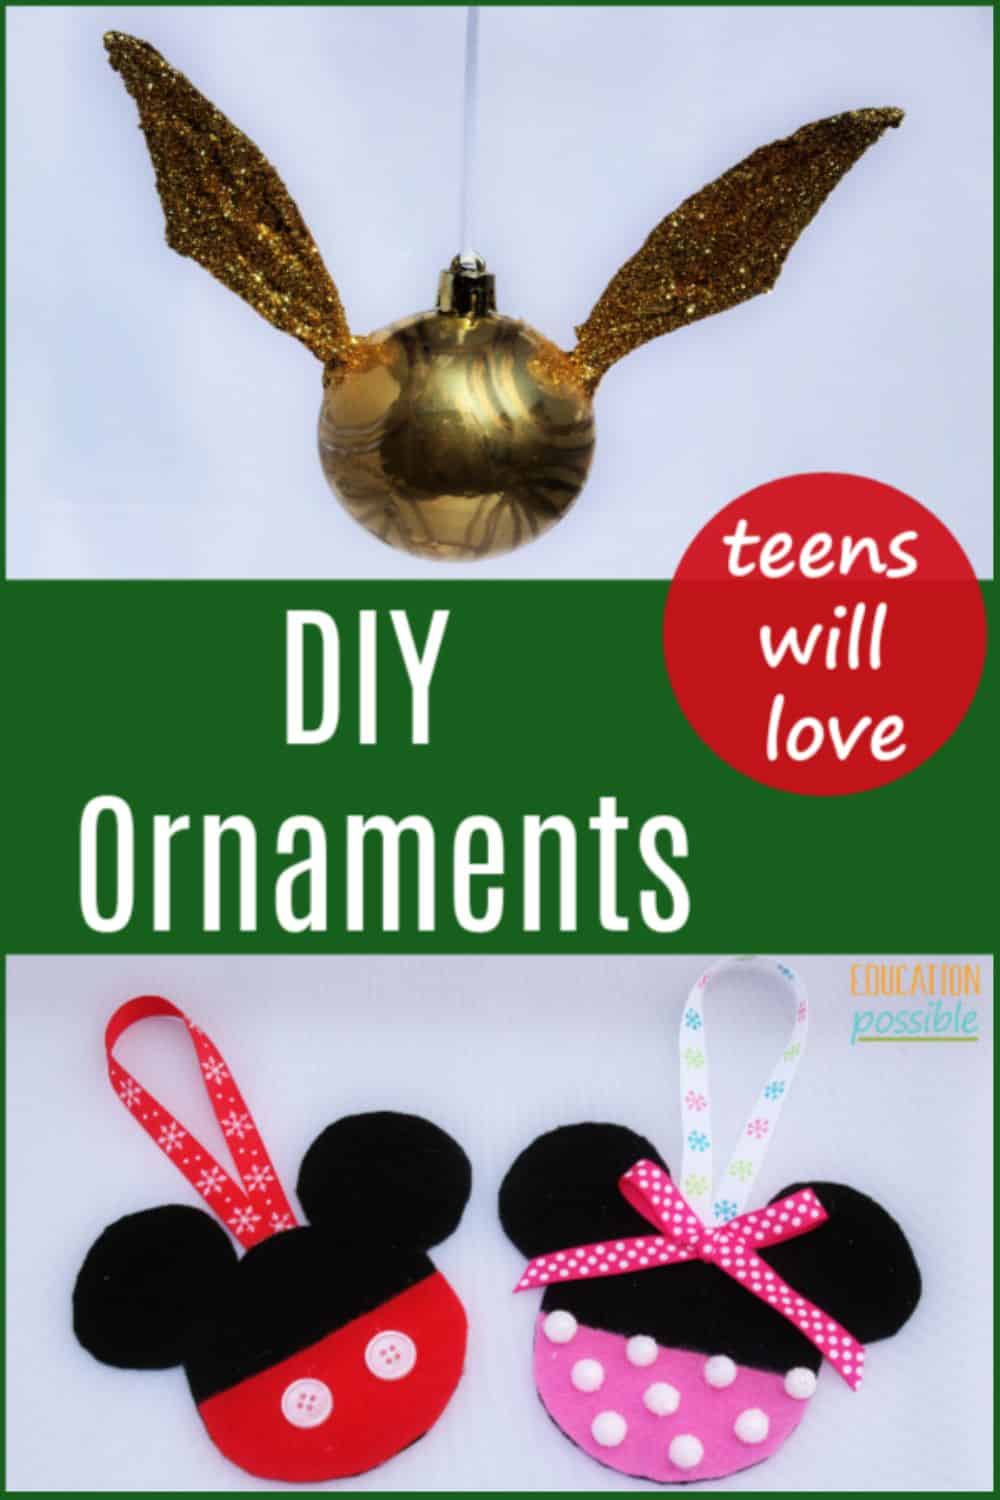 5 Homemade Christmas Ornaments To Make With Tweens